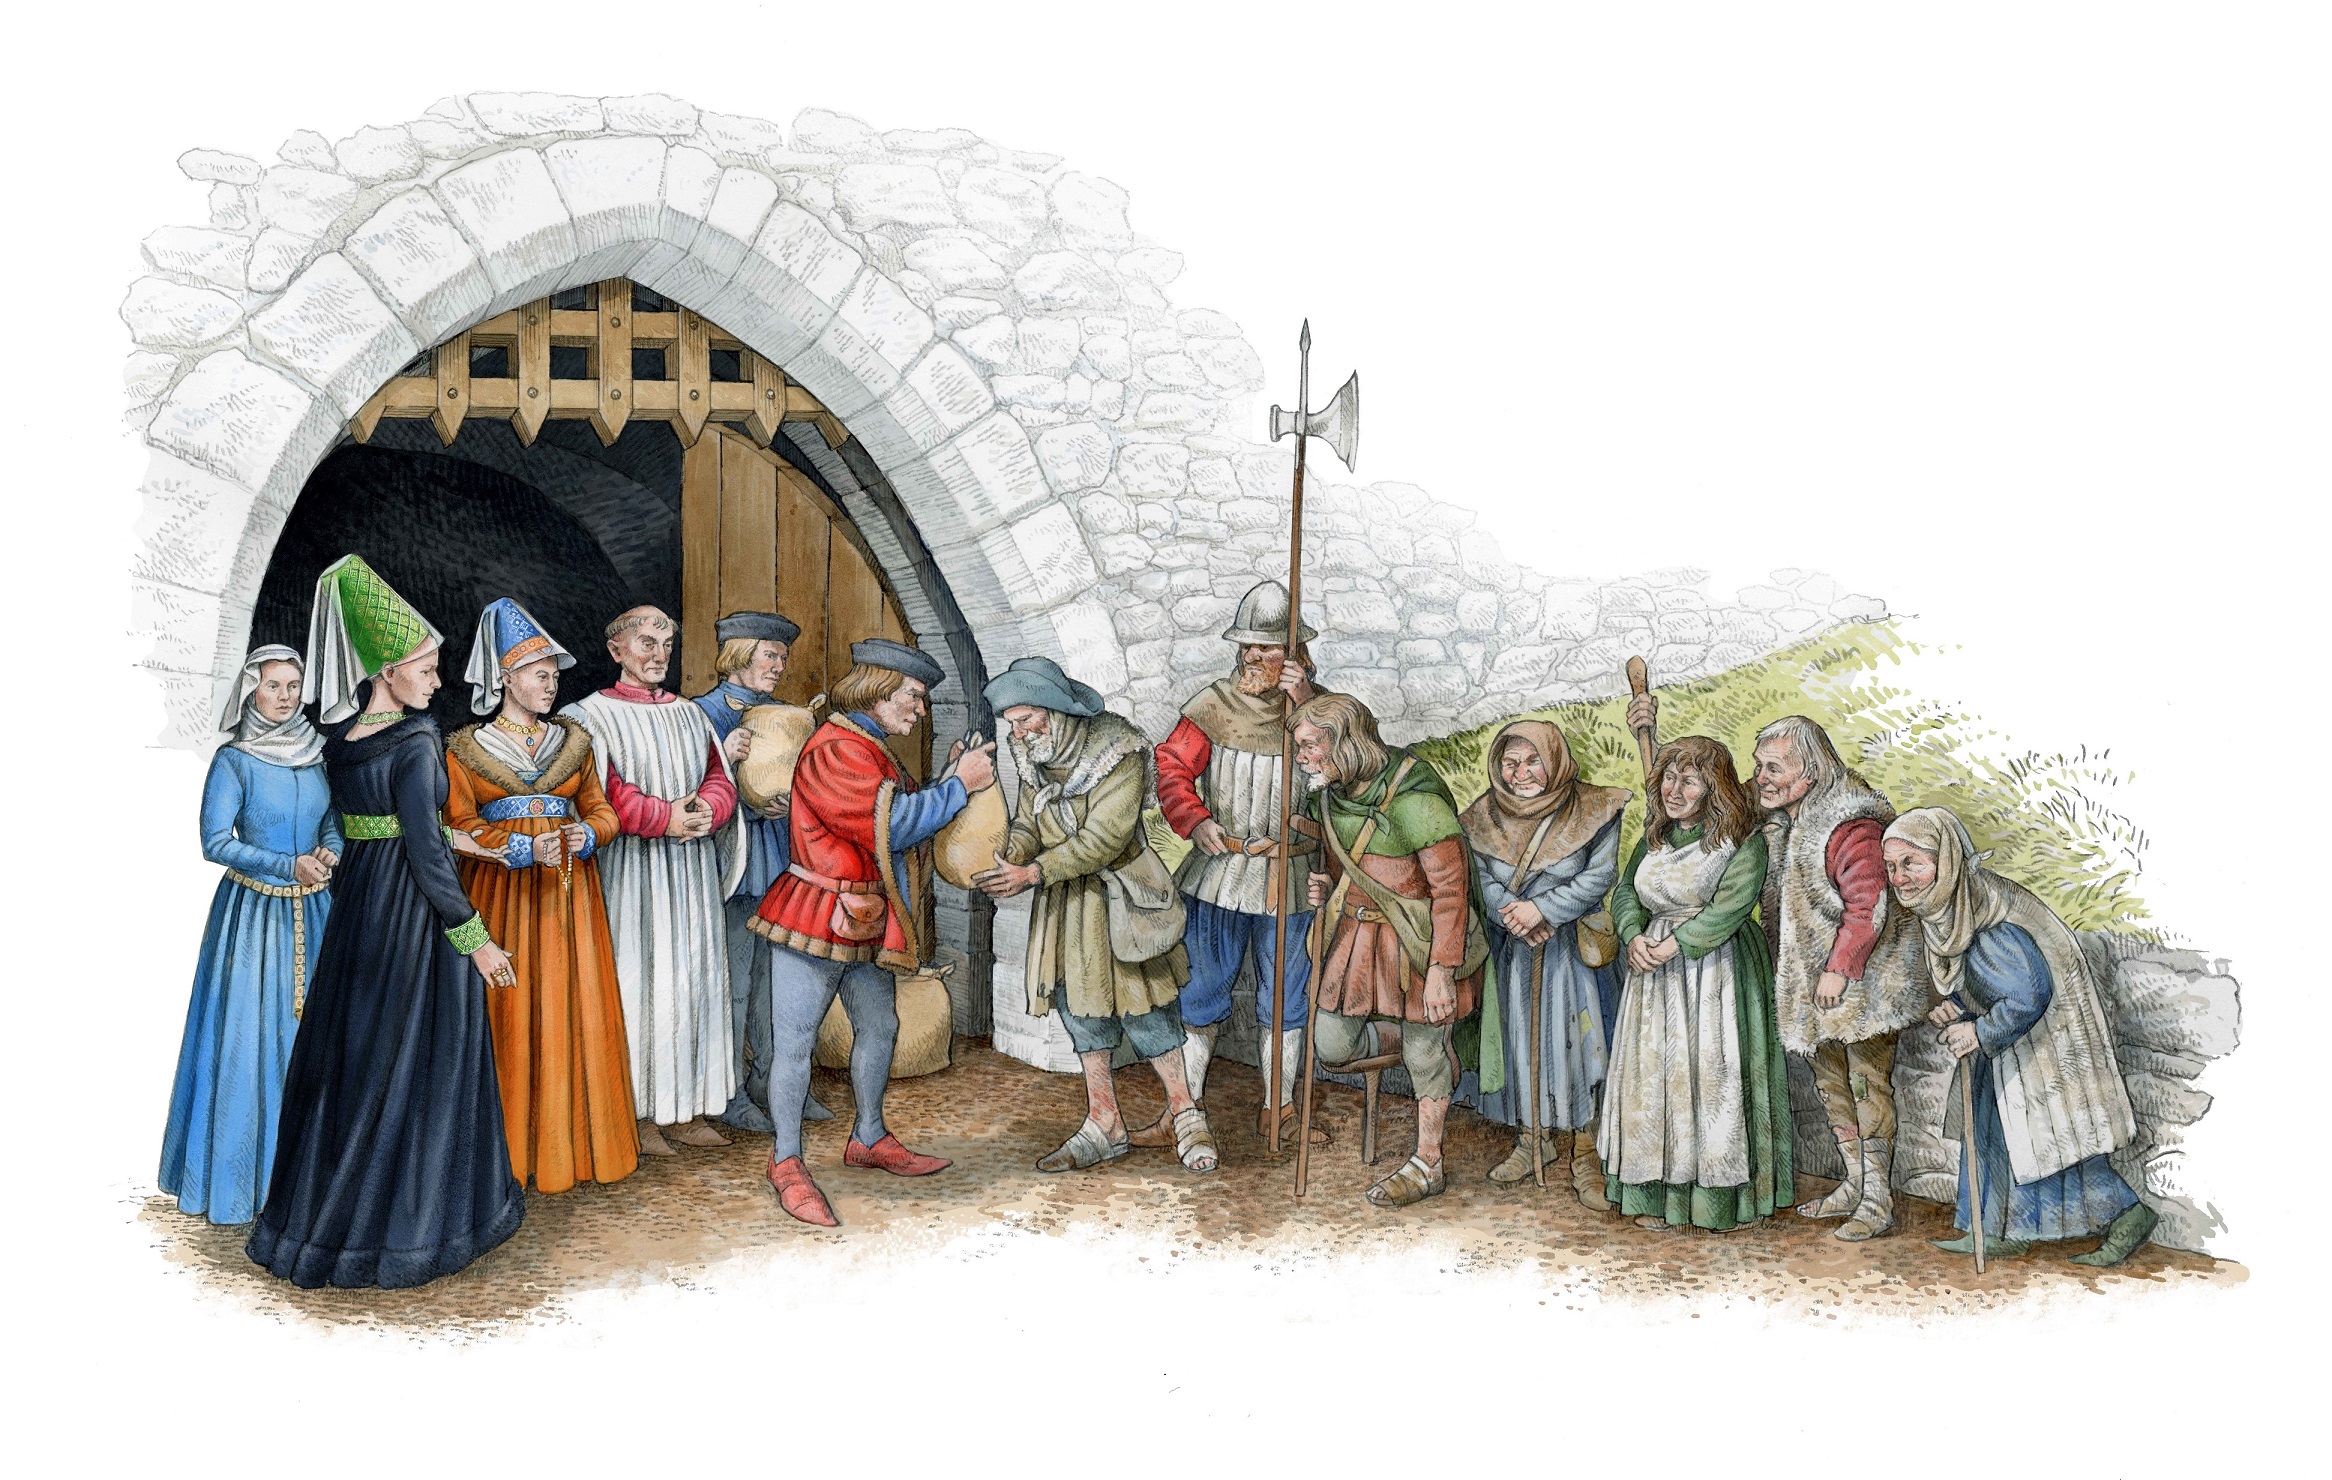 An illustration showing Mary of Guelders giving charity to people at the gates.